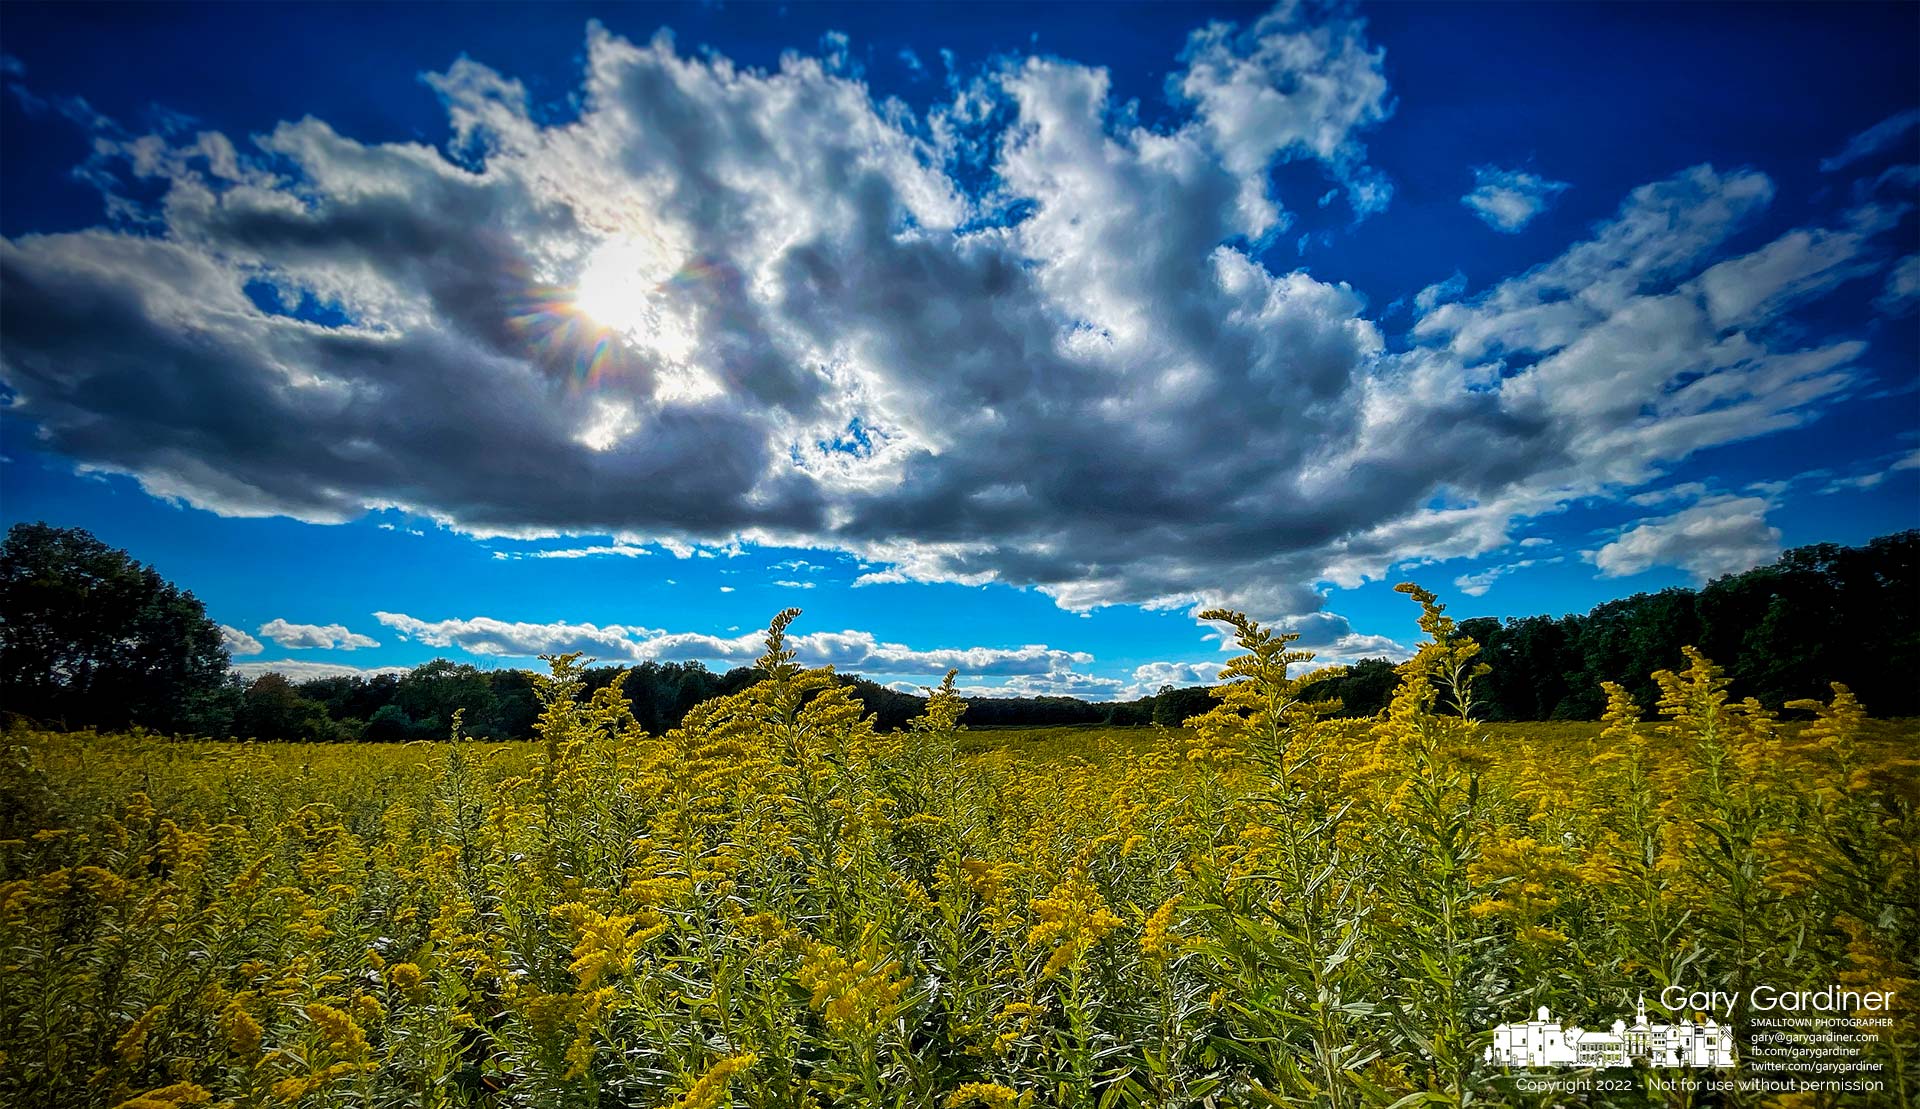 The sun peeks between a break in clouds moving over the meadow at Sharon Woods Metro Park where goldenrod is the predominant flower on the first day of fall. My Final Photo for September 22, 2022.